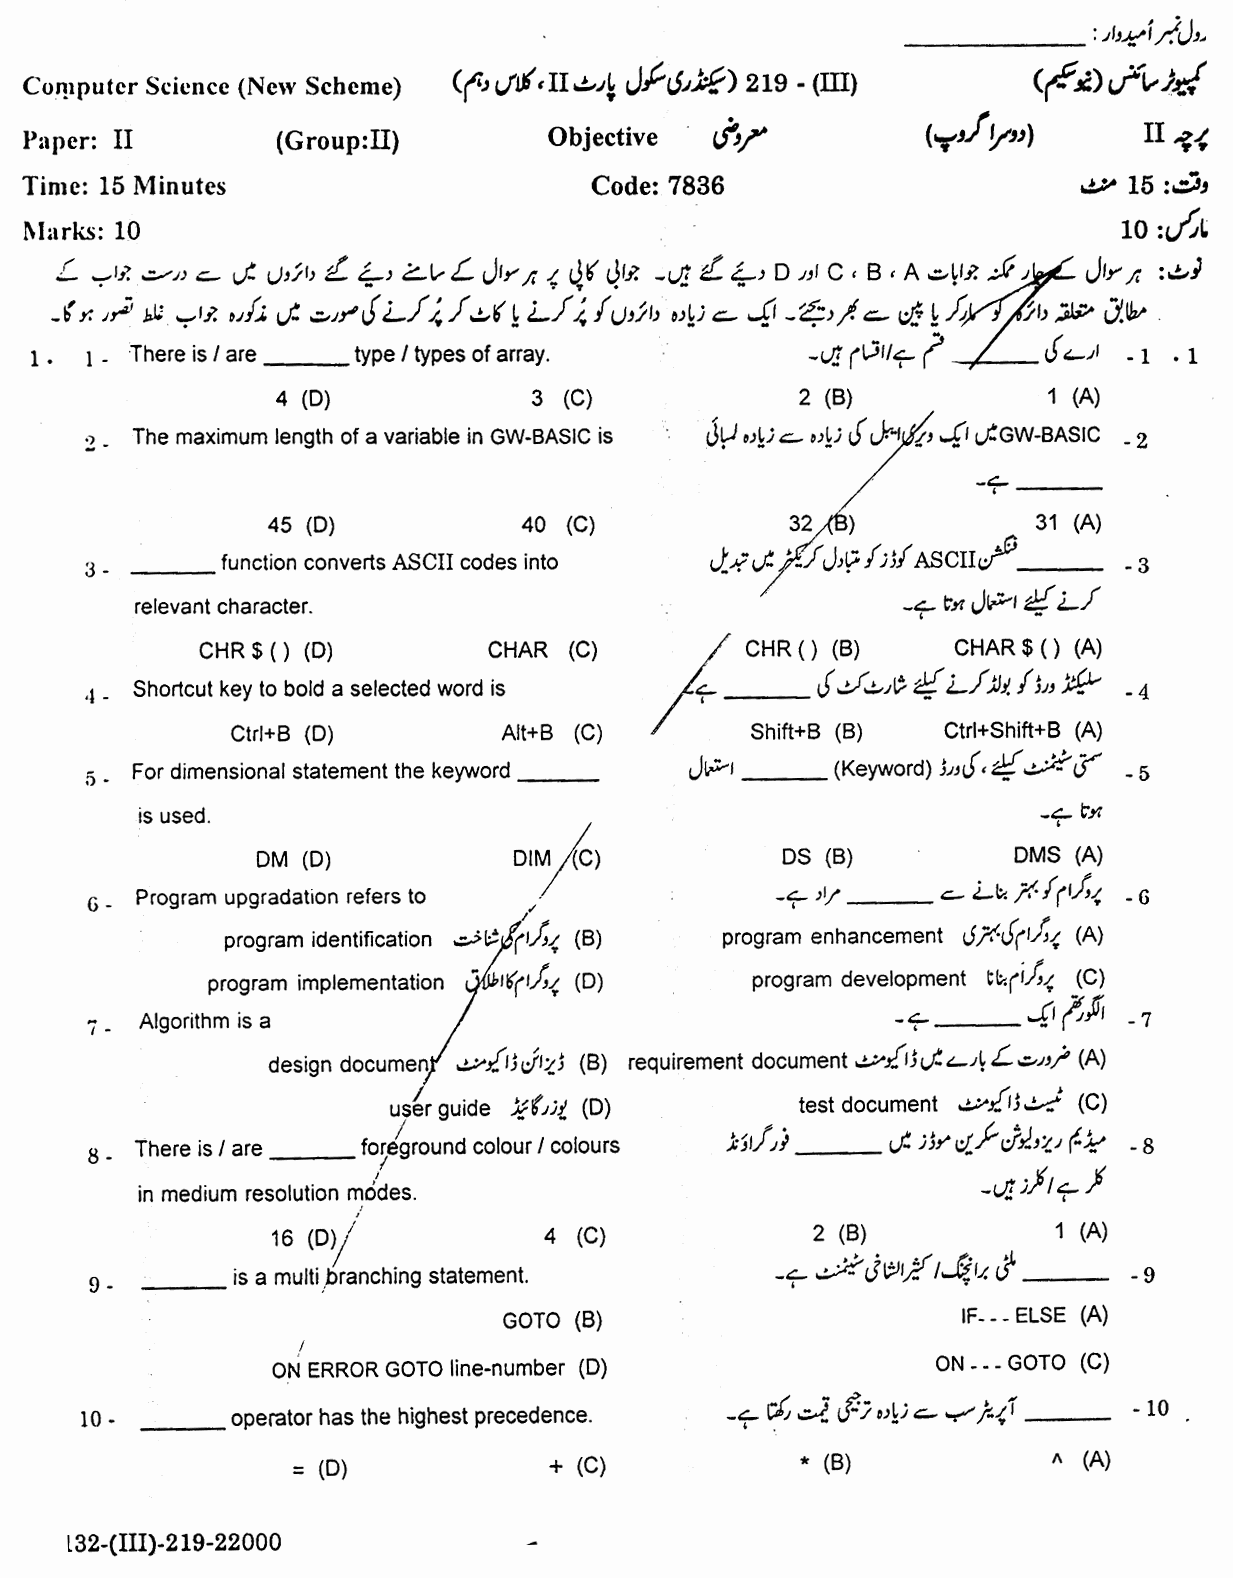 10th Class Computer Science Paper 2019 Gujranwala Board Objective Group 2